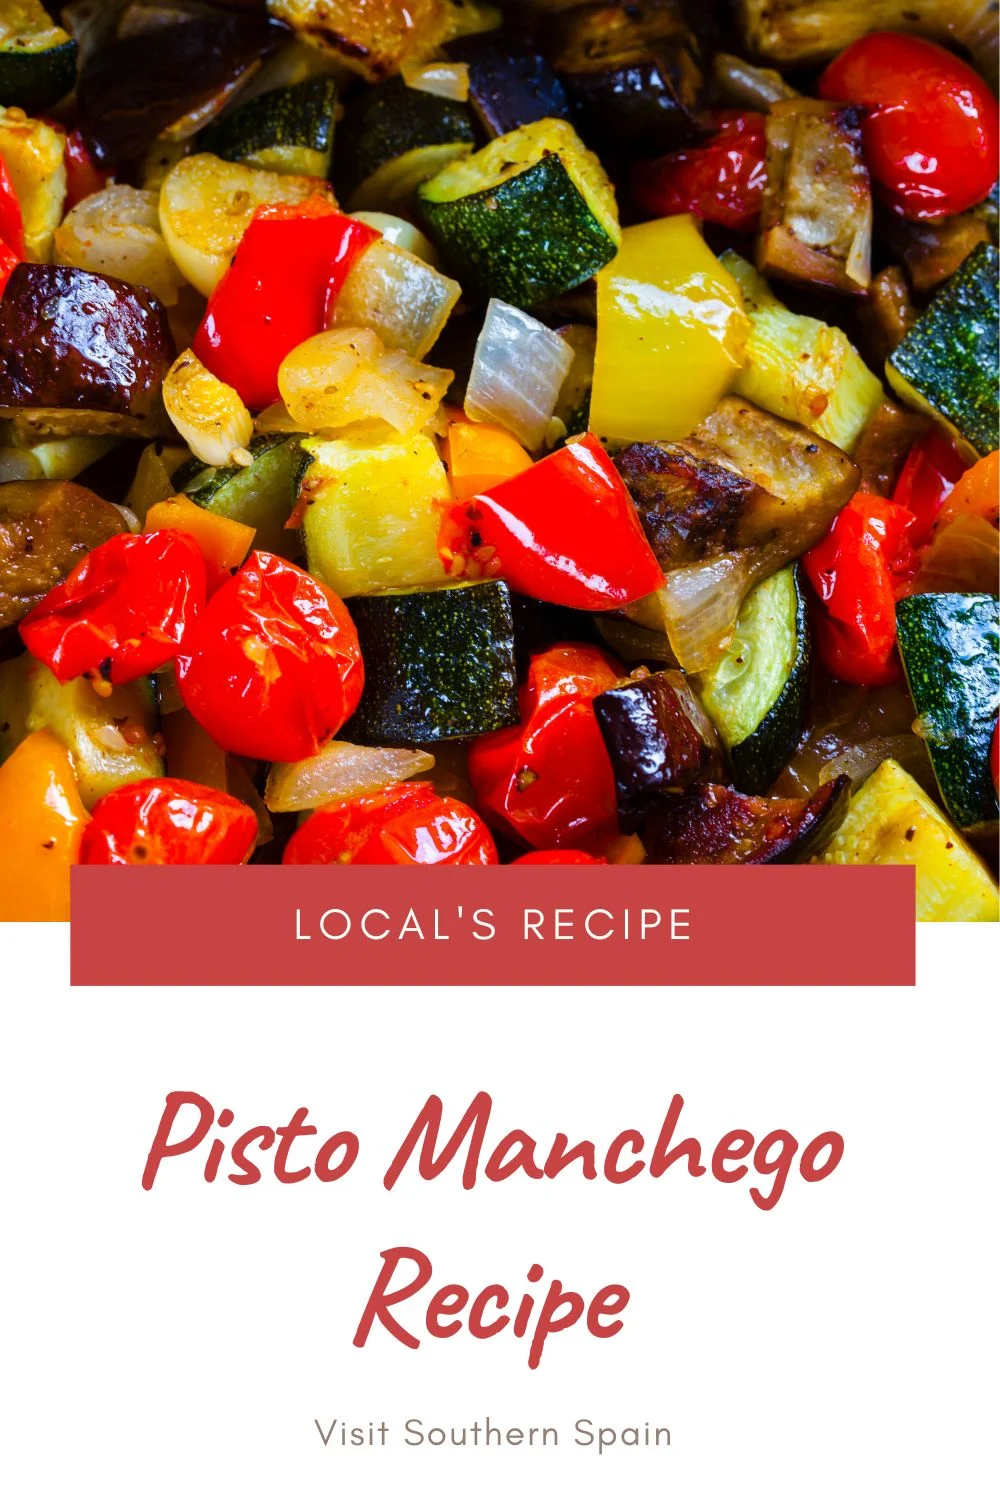 Do you want to try the best Pisto Manchego recipe? This is our recipe for the best summer stew that you definitely must try. The Pisto Manchego recipe is a simple vegetable dish for which you need only a few ingredients. The ripped tomato is the star of this Spanish ratatouille, which dances together with the other vegetables and creates a flavourful and light veggie stew, just perfect for warm days. Don't believe our word, try it now! #pistomanchego #pisto #vegetablestew #spanishratatouille